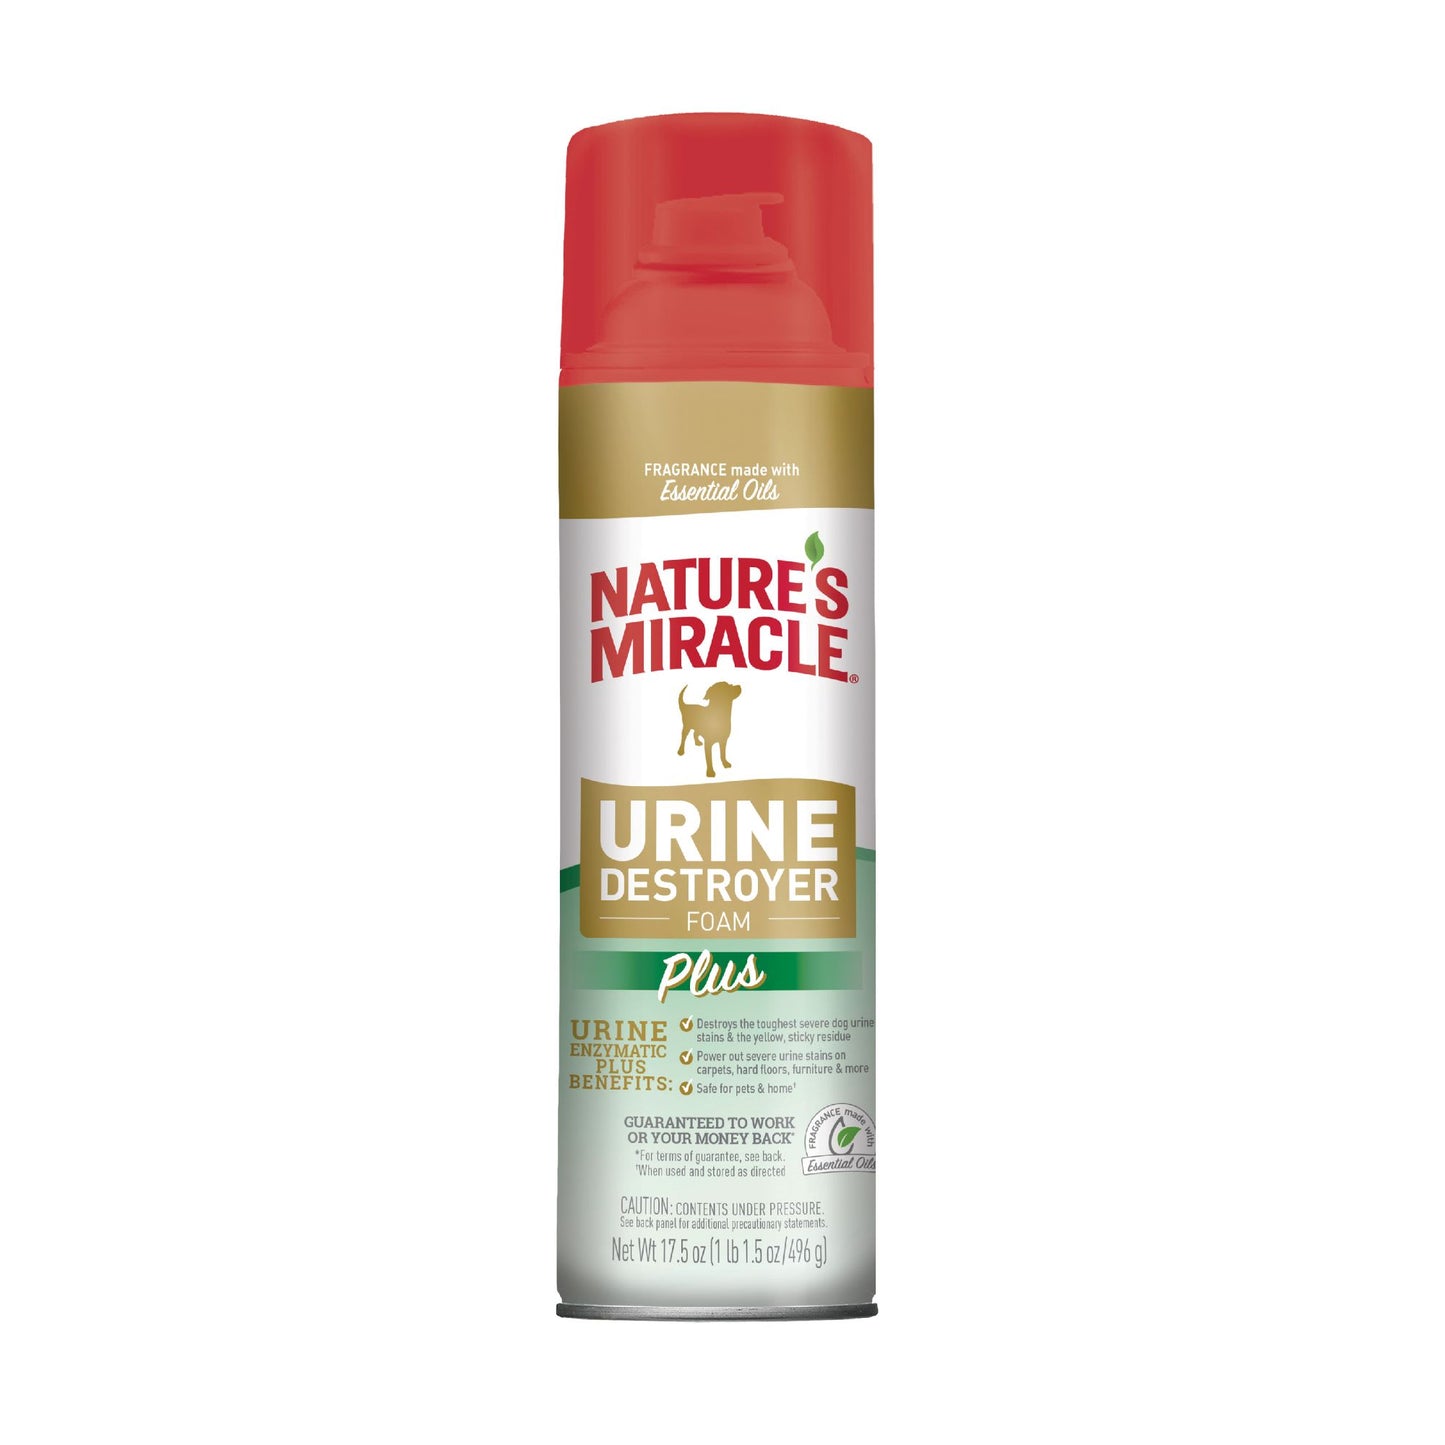 Nature's Miracle Urine Destroyer Foam Plus Stain & Odor Remover for Dogs, 17.5 fl. oz., 17.5 FZ